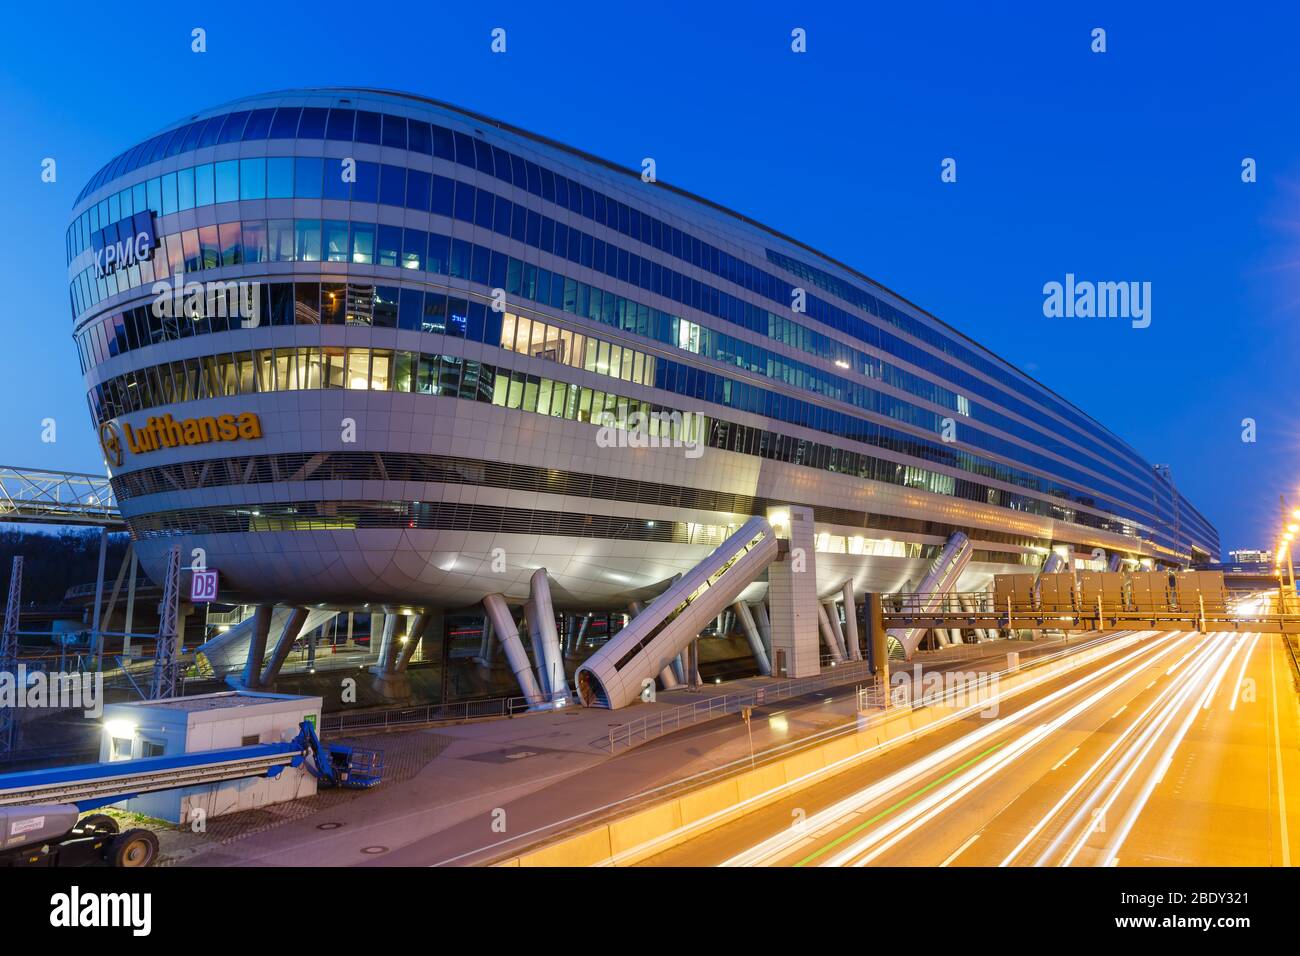 Frankfurt, Germany – April 7, 2020: The Squaire building at Frankfurt airport (FRA) in Germany. Stock Photo